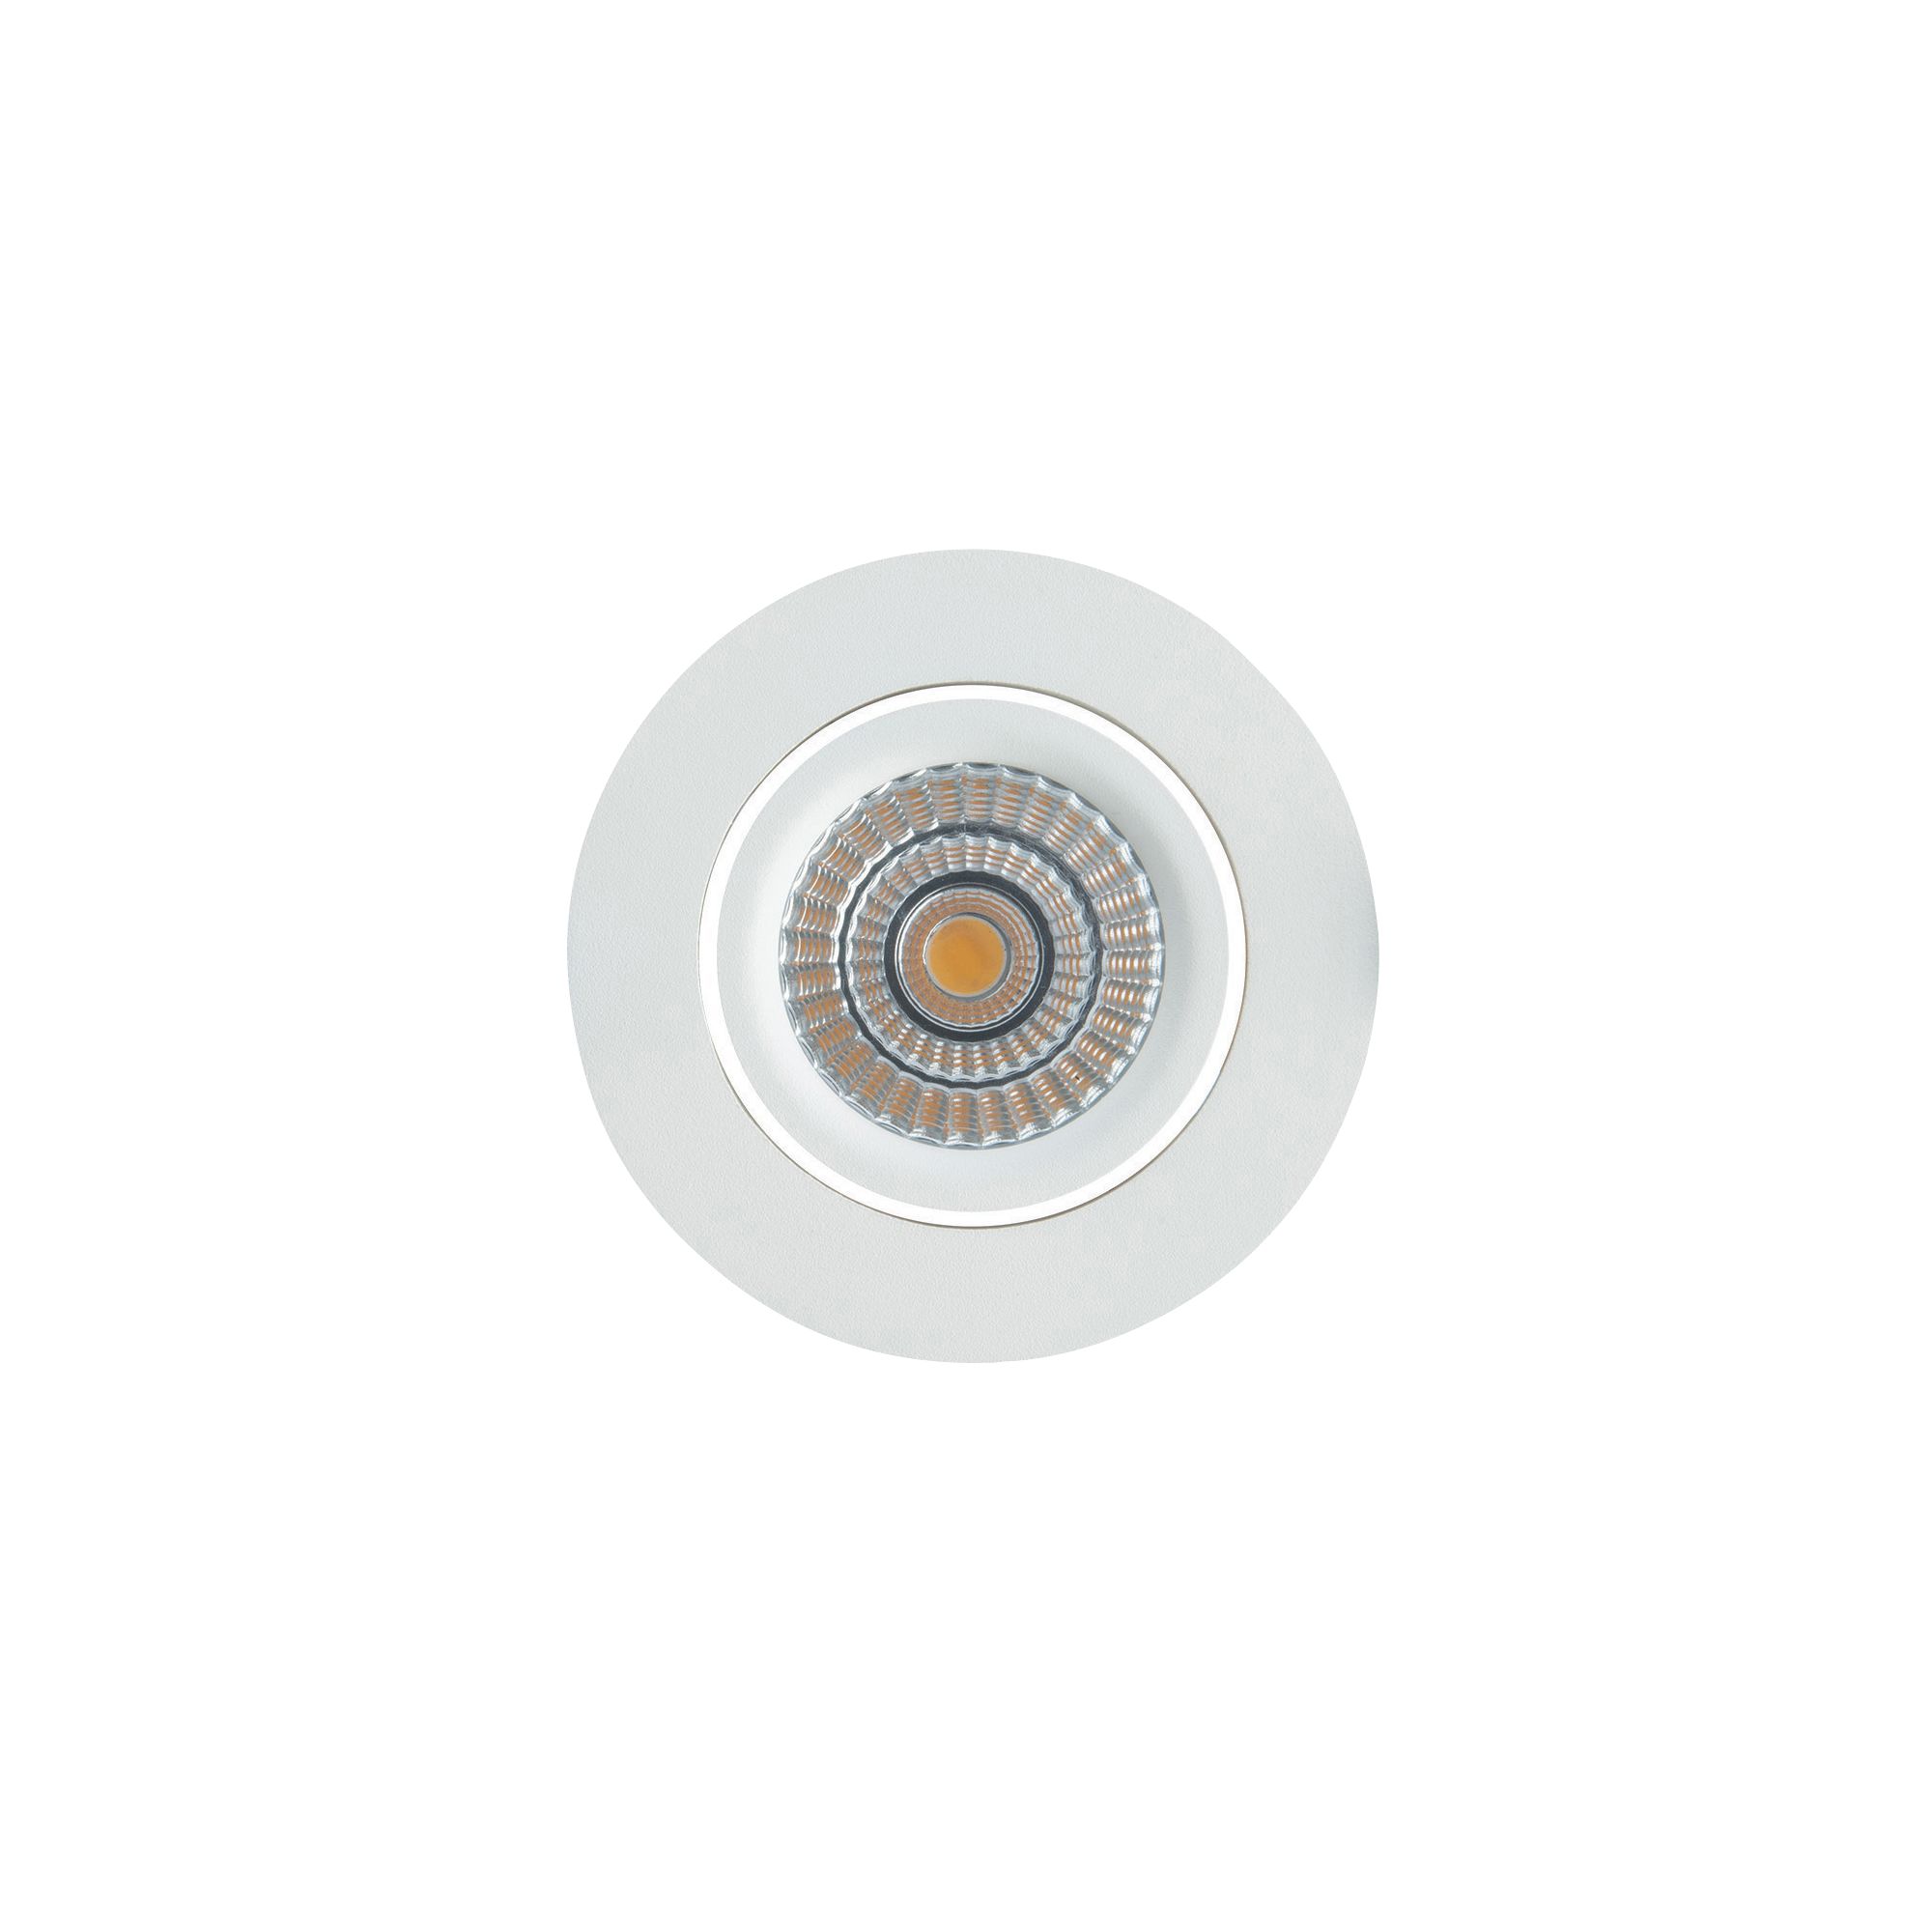 Luceco White Non-adjustable LED Cool white Downlight 6.2W IP44